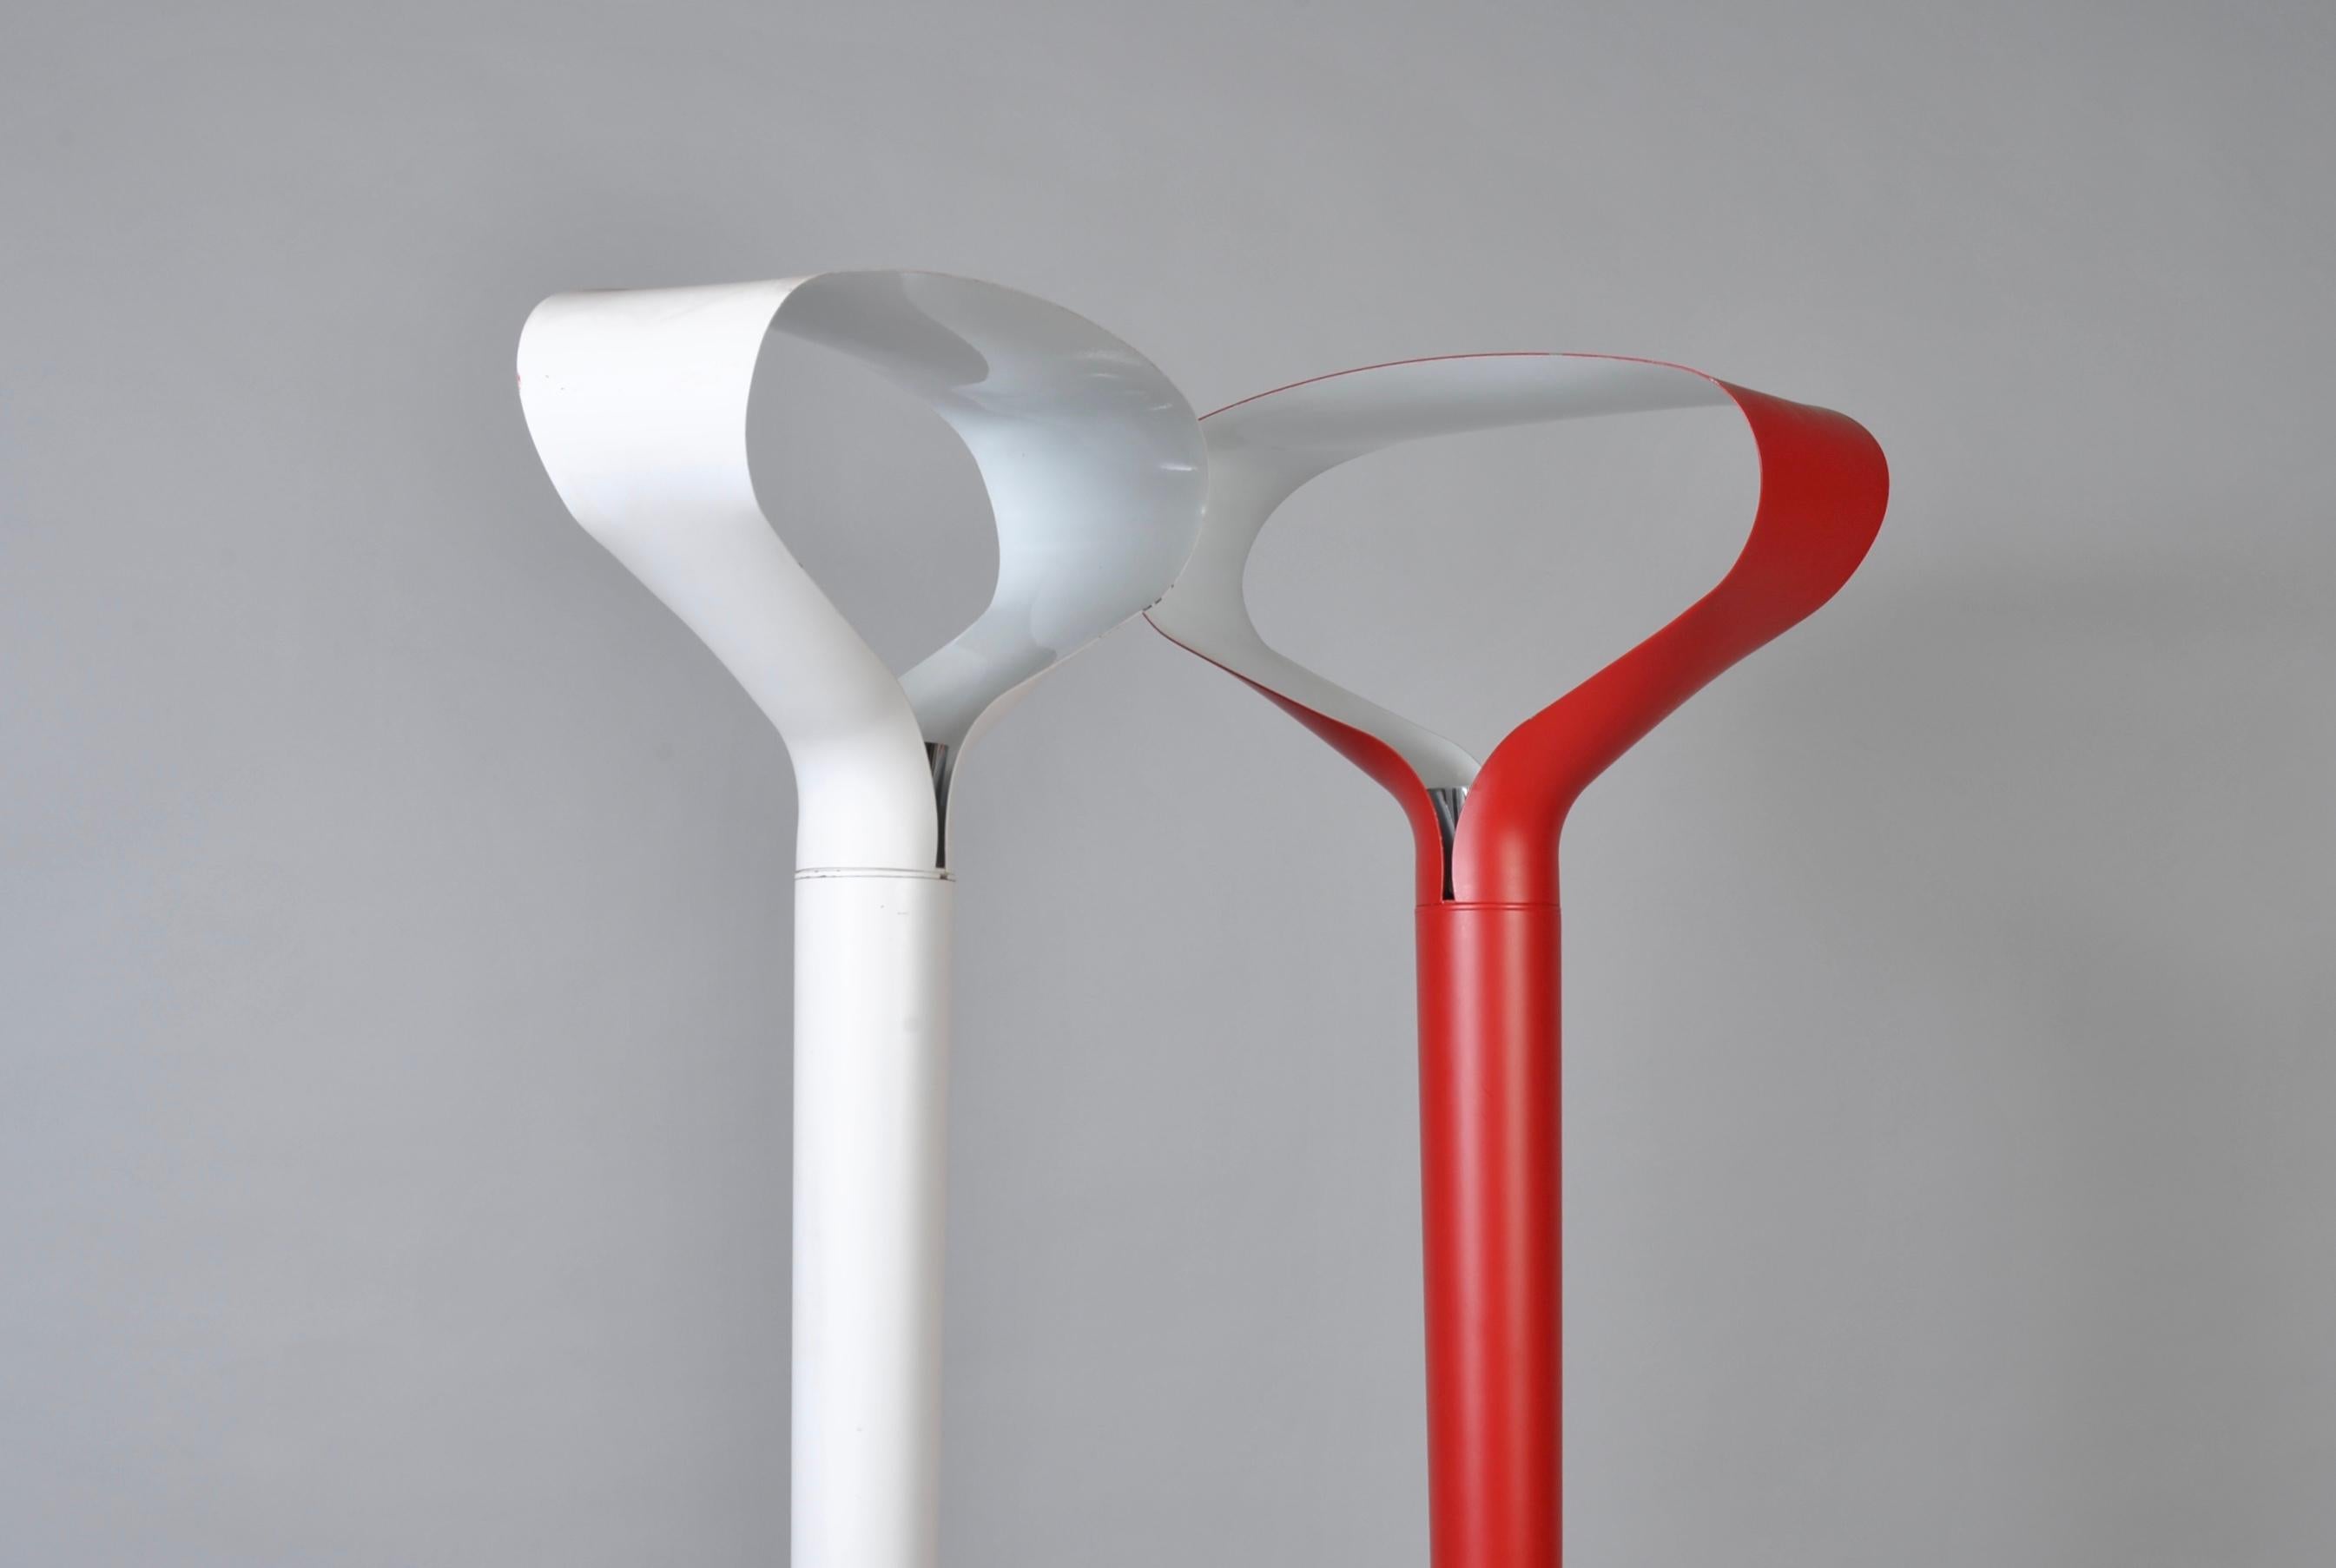 Highly unusual Italian modernist floor lamp. Red and white versions are available.
Red painted steel with solid cast resin base, very heavy. Fully rewired.
An impressive stand out piece of modernist design.